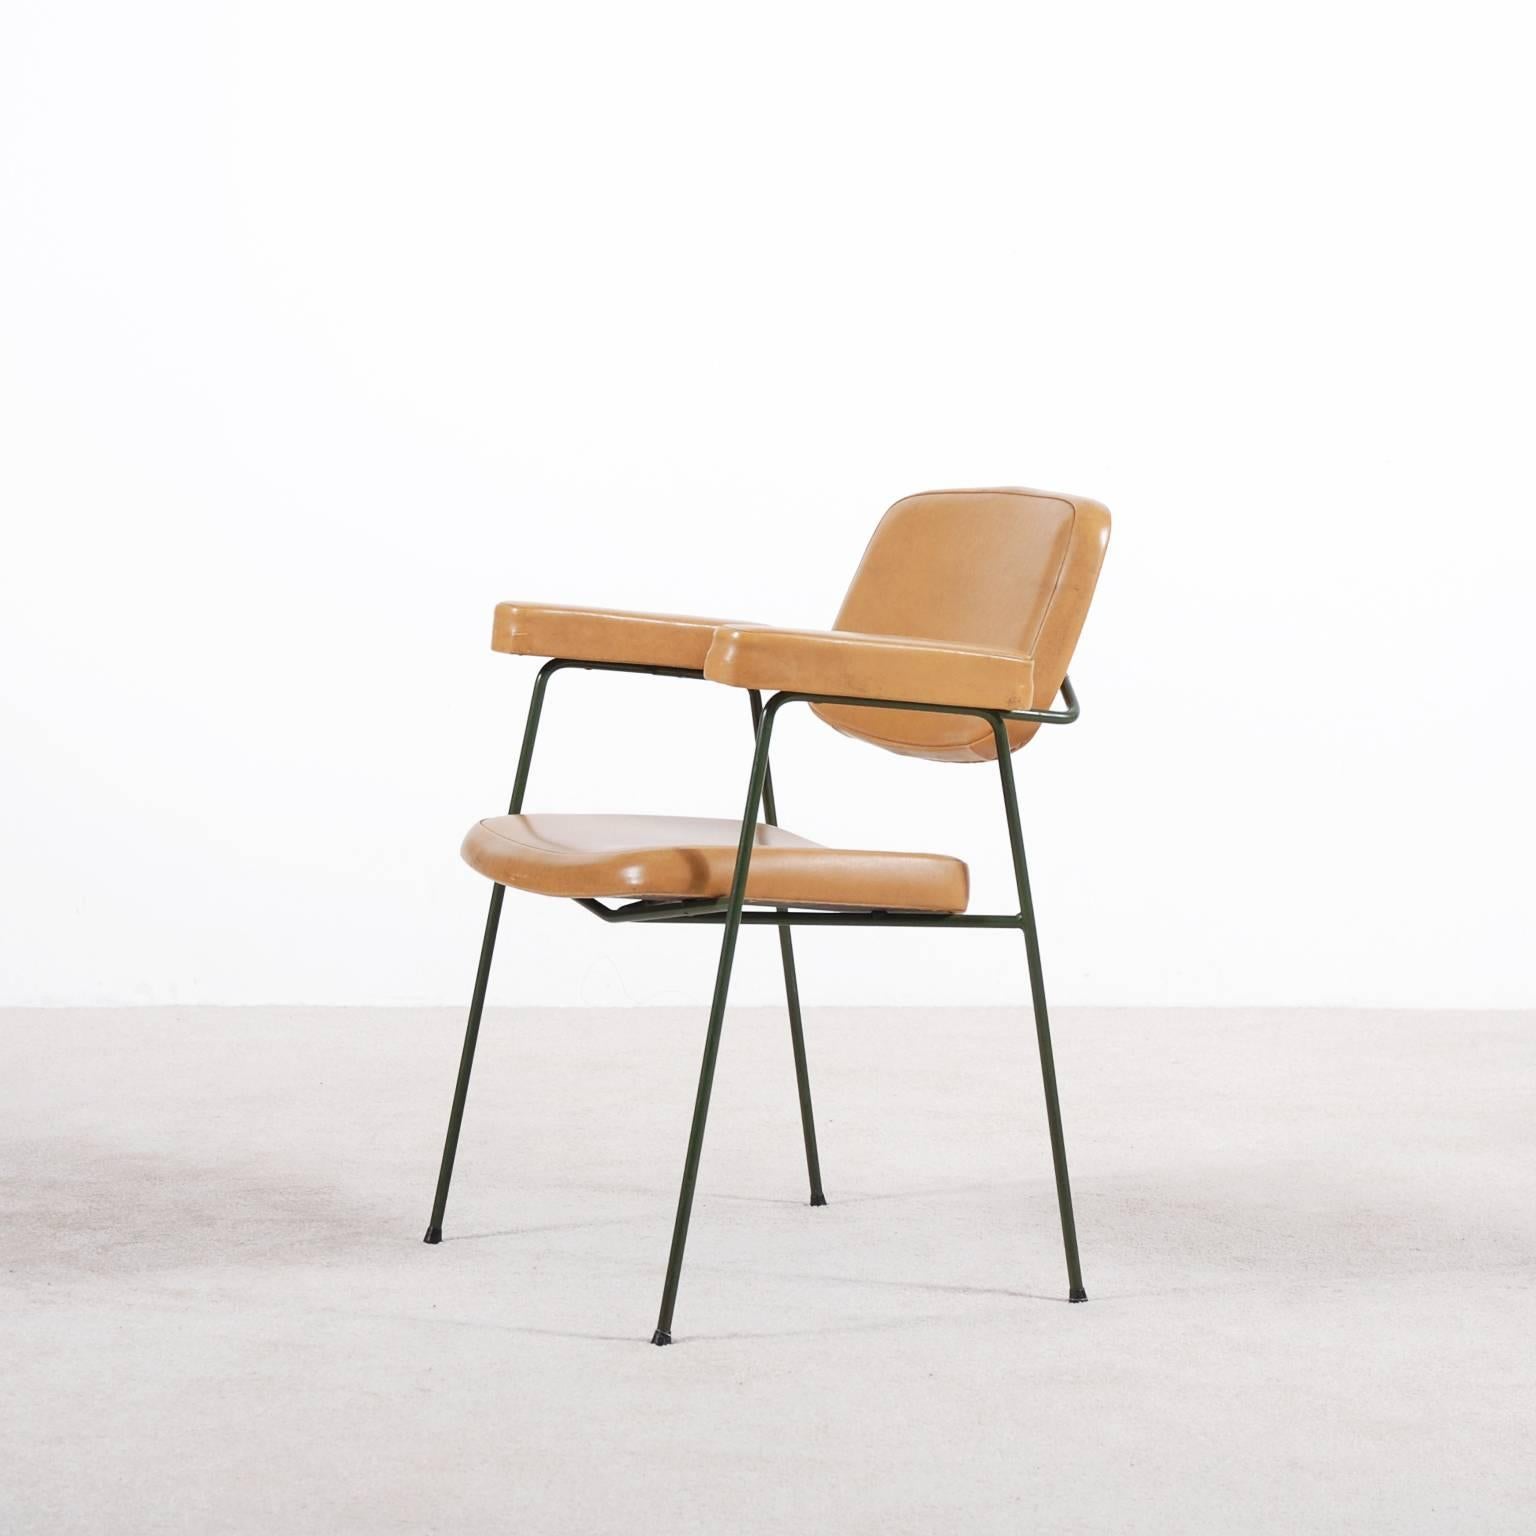 CM197 Armchair designed by Pierre PAULIN for Thonet France in 1958.
Green Bottle lacquered metal Frame. Lovely Mustard color of the vinyl.

Very good original condition circa 1960, some marks and smalls holes on the mustard synthetic